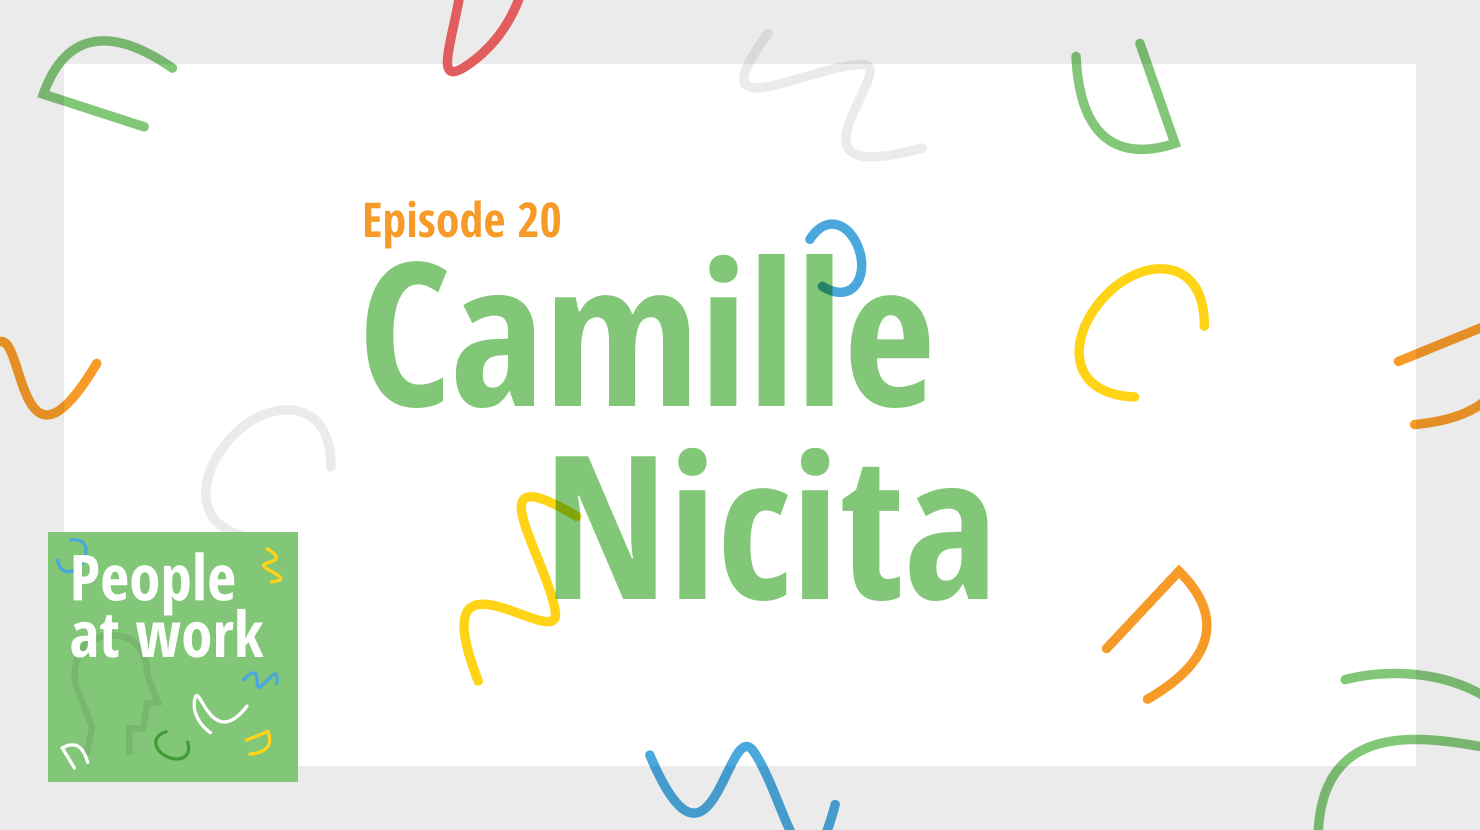 Camille Nicita on why belonging is more important than skills